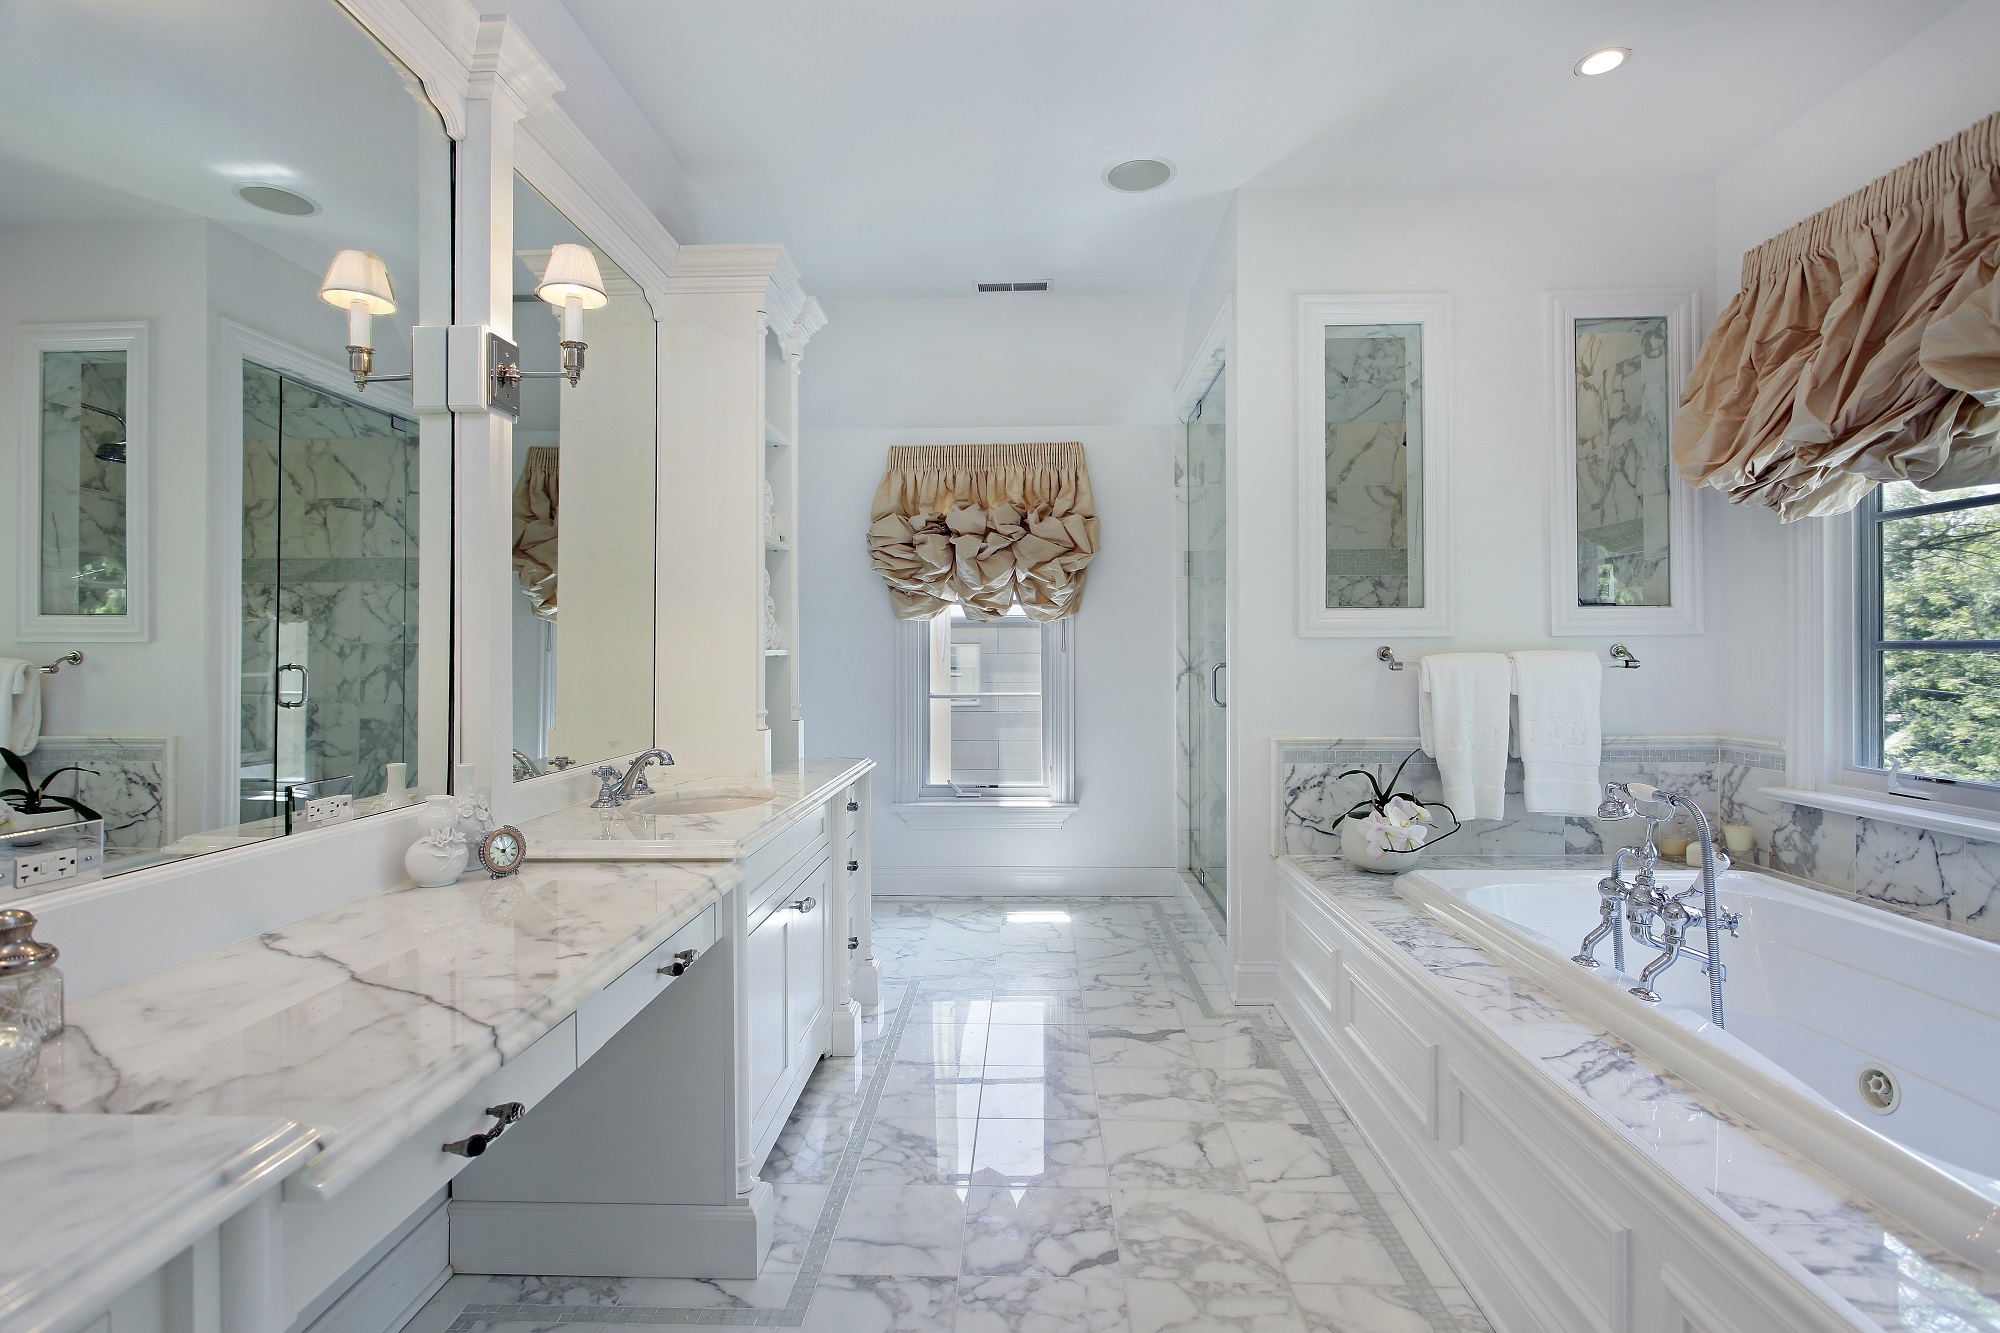 Bathroom Remodeling Contractor in Rocky Hill, CT